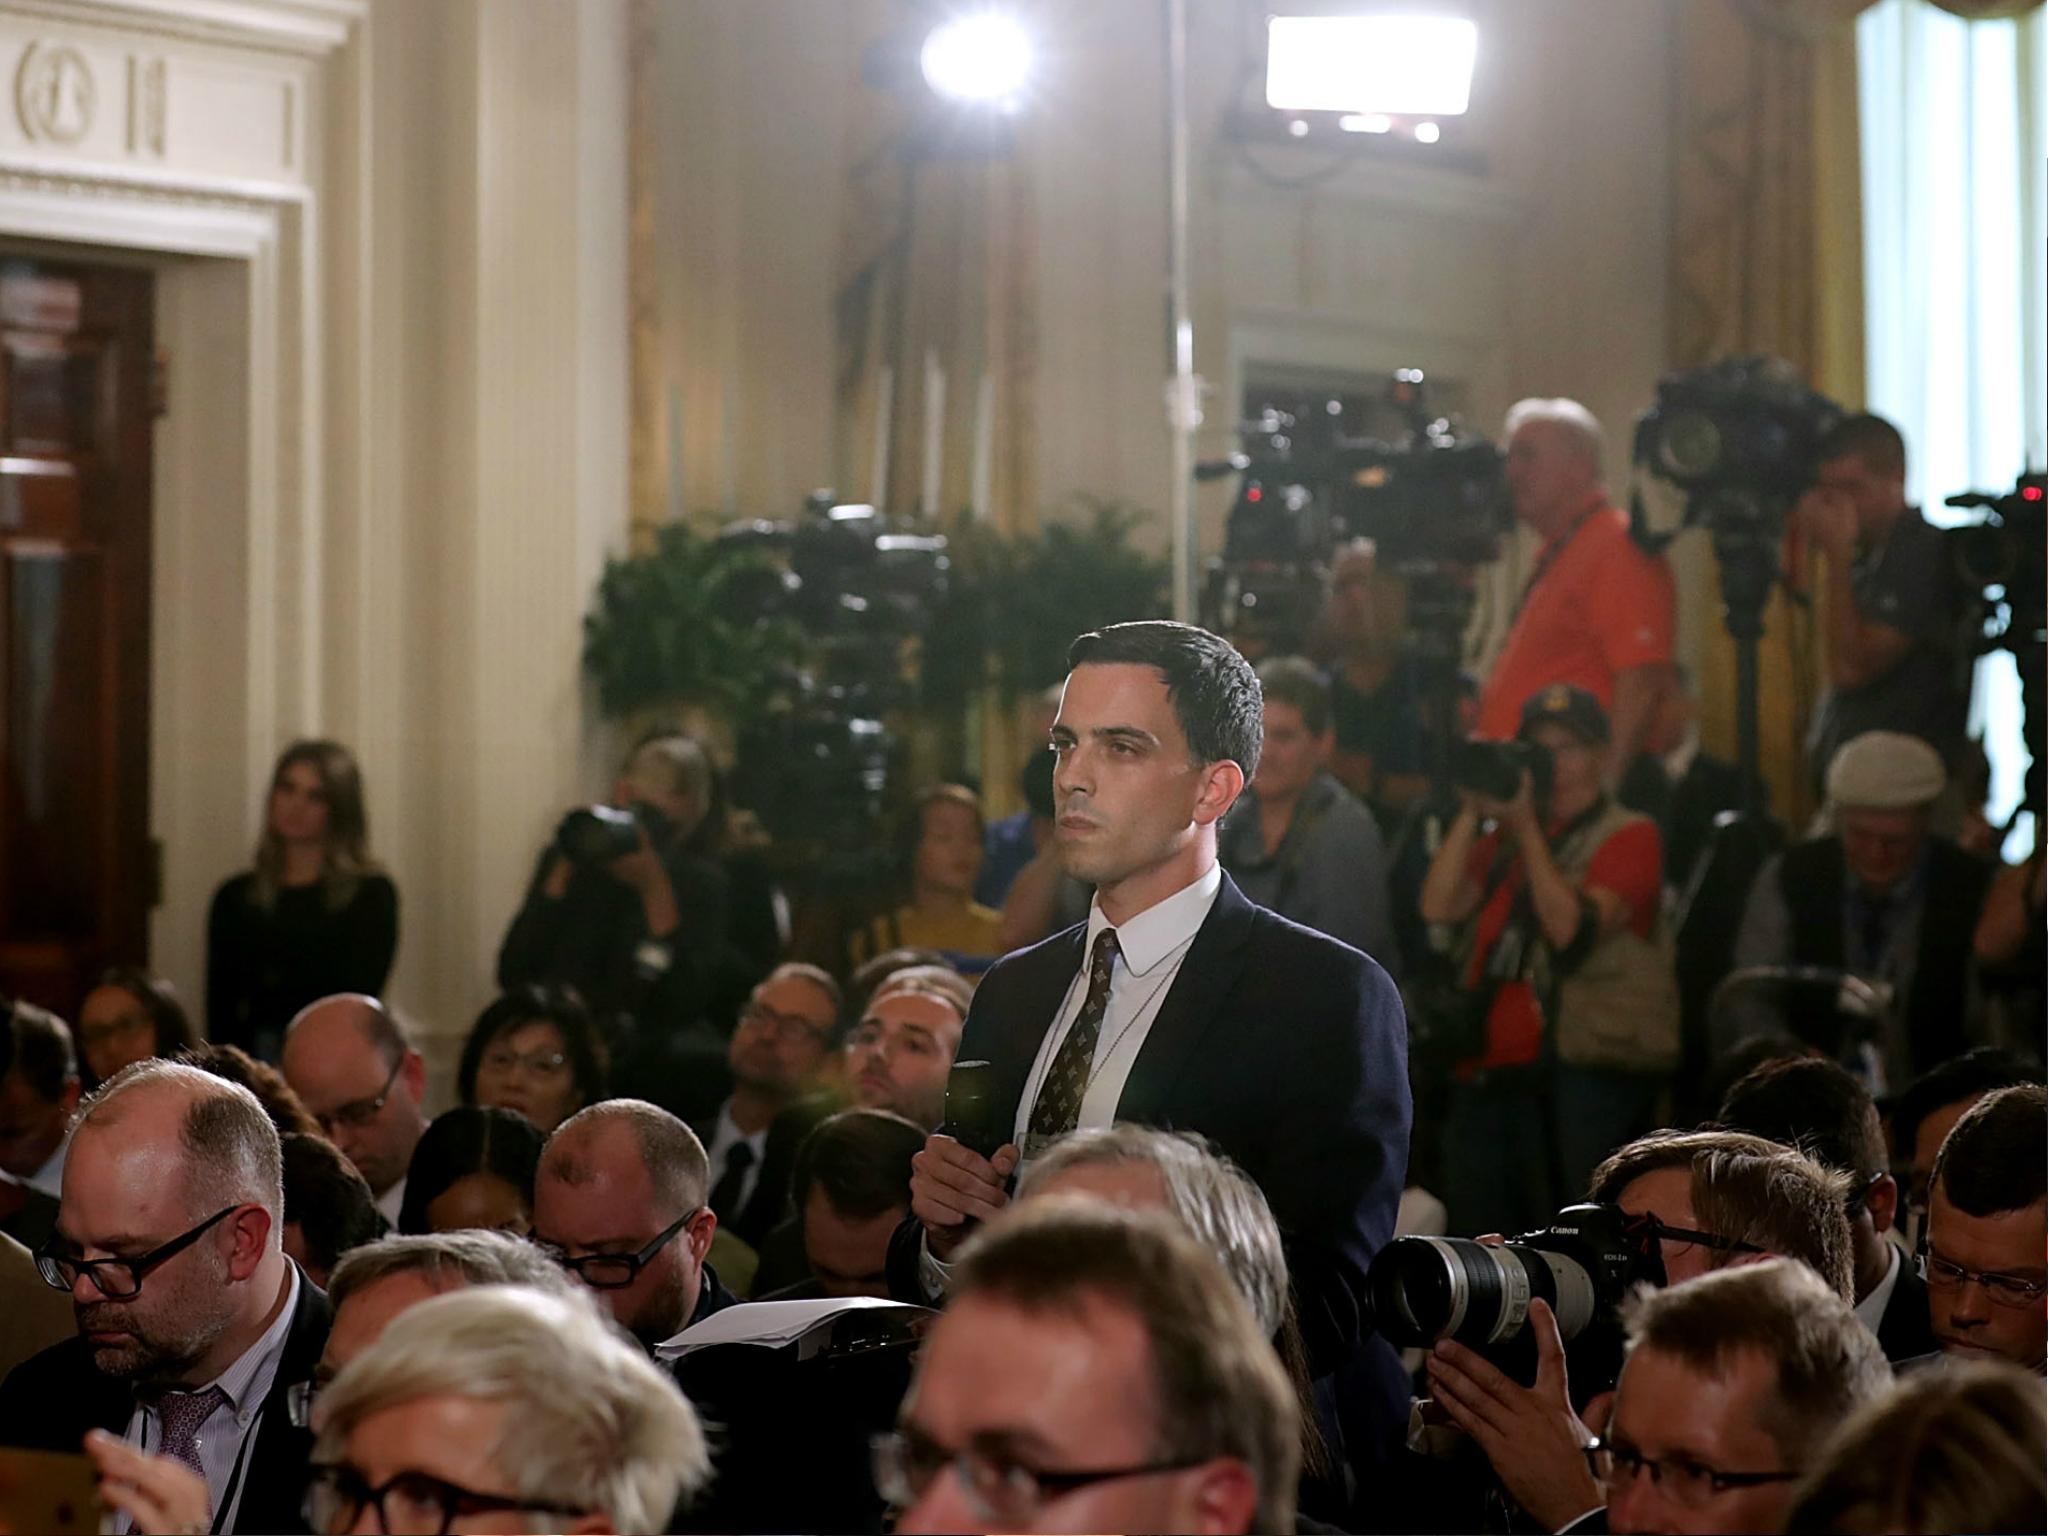 One America News Network's (OANN) White House correspondent Trey Yingst is the most called-upon member of the White House press corps during briefings.